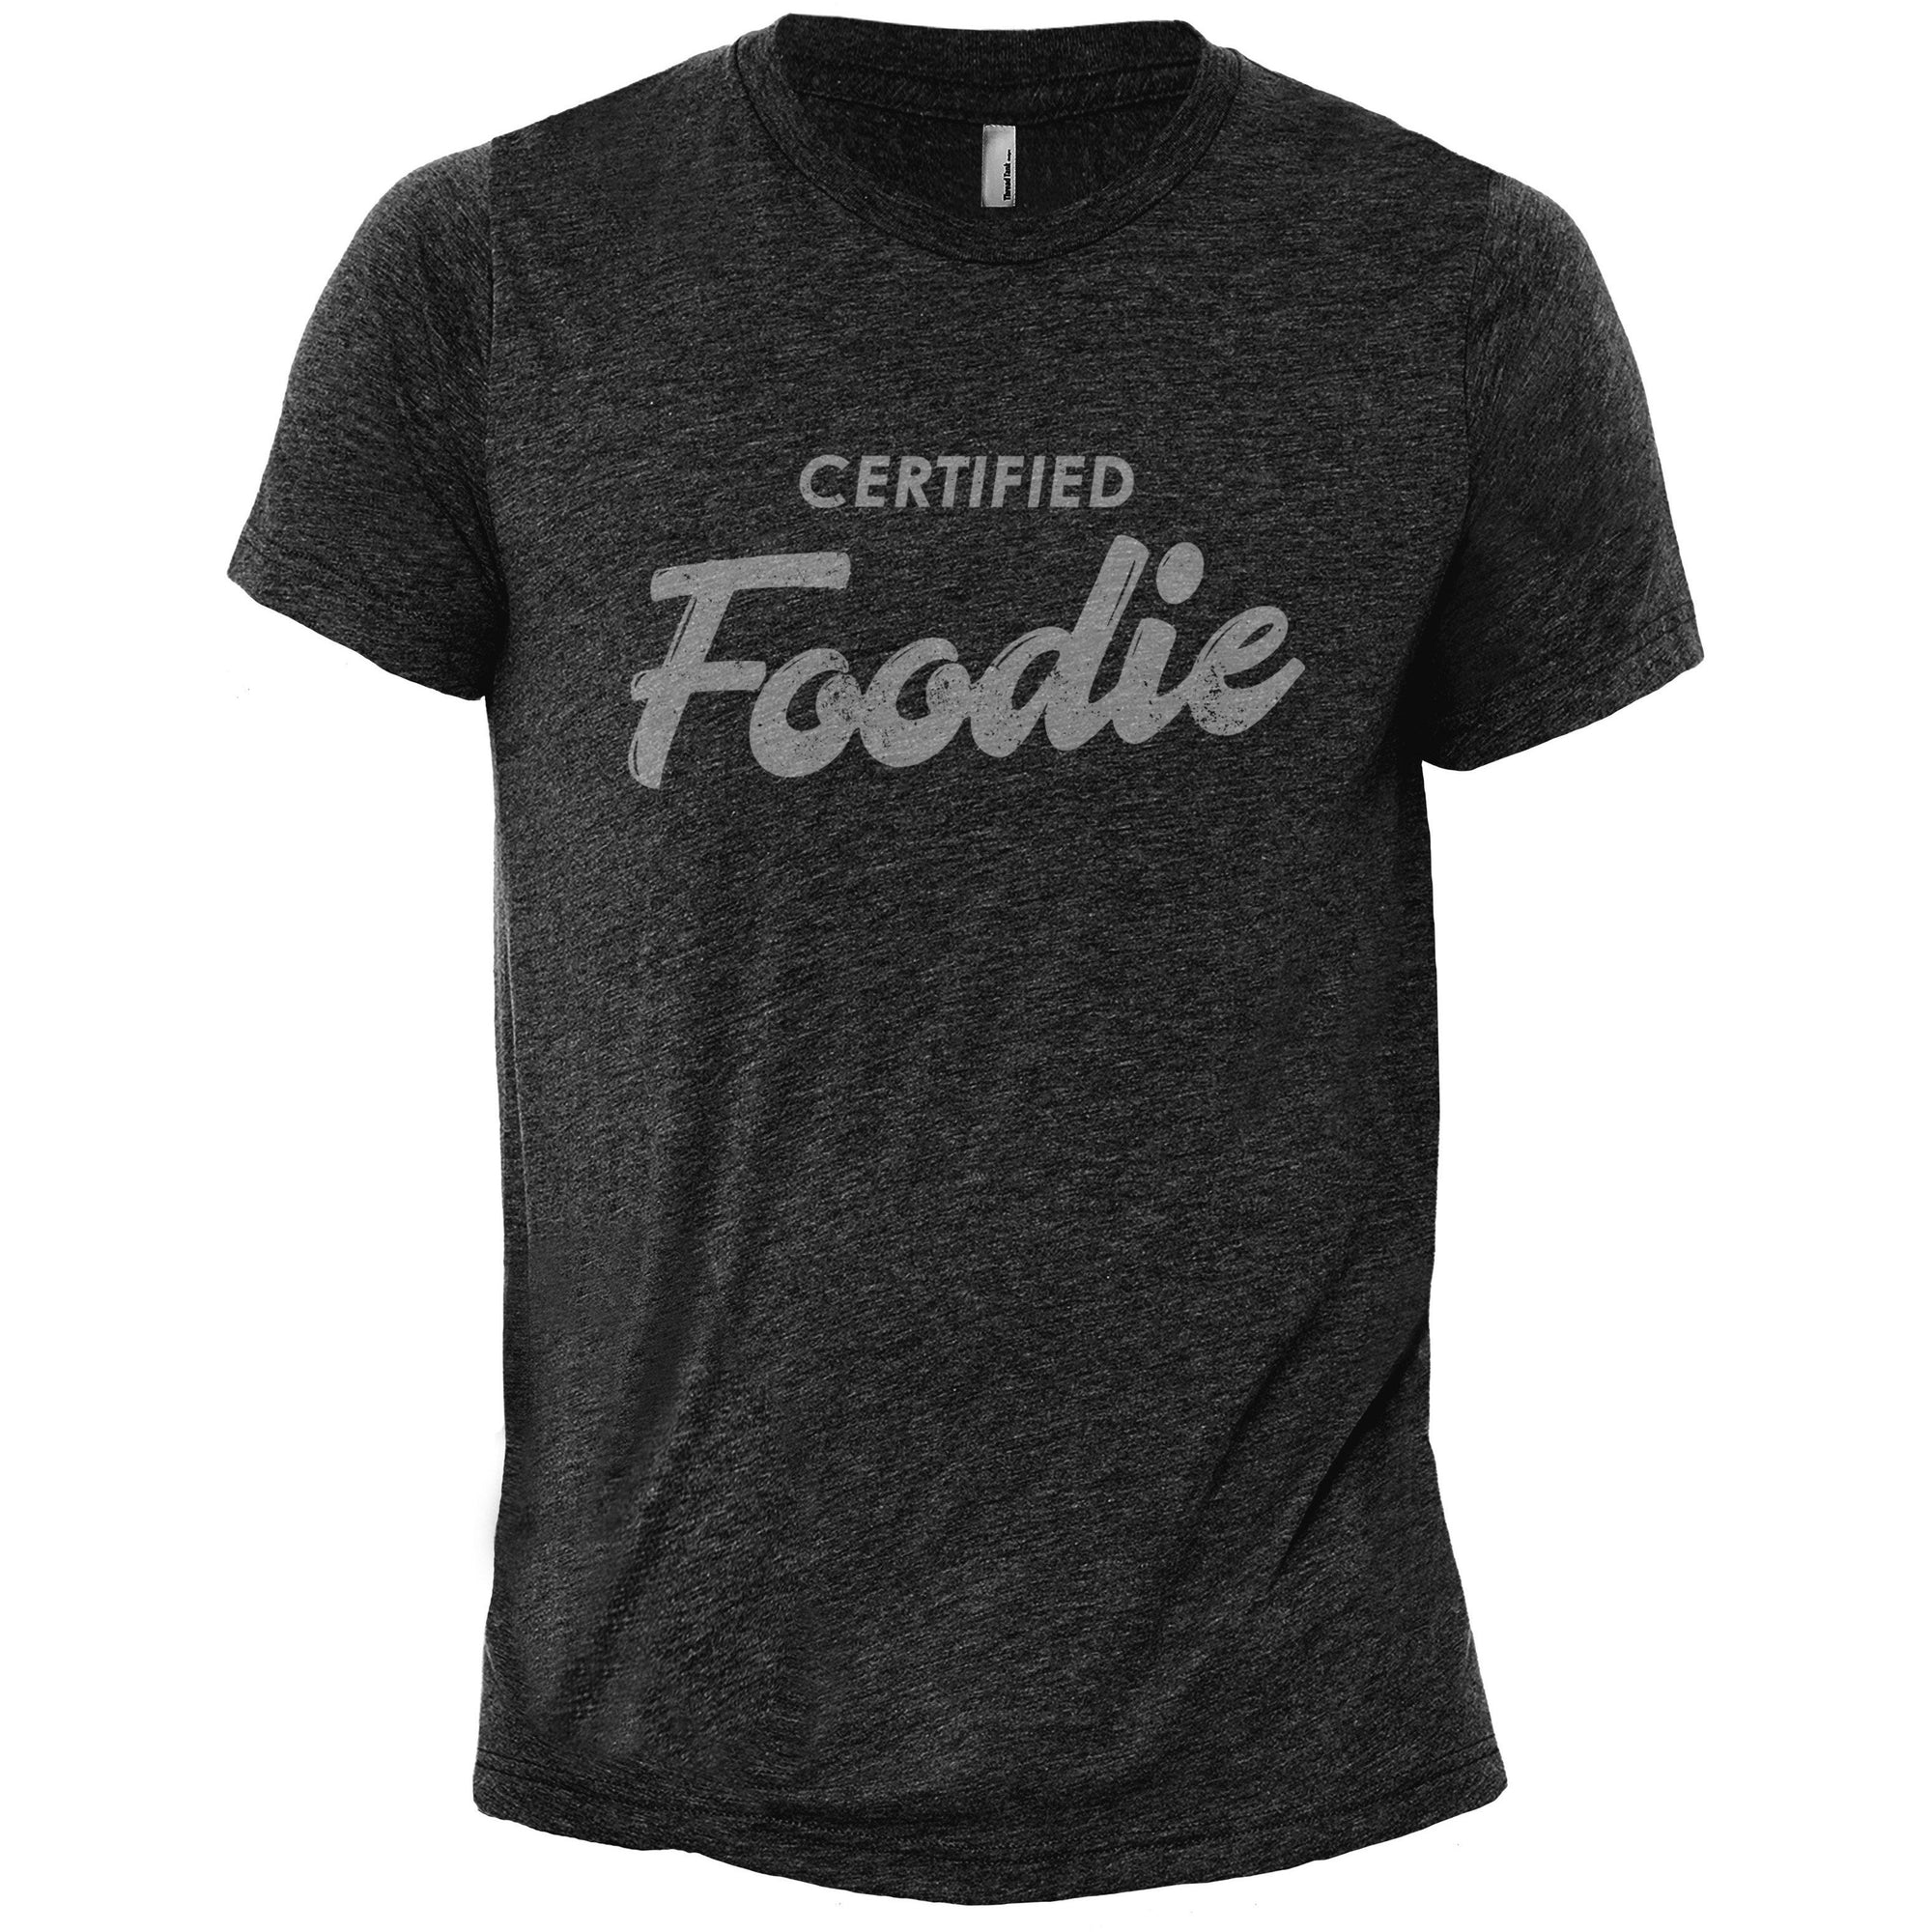 Certified Foodie Charcoal Printed Graphic Men's Crew T-Shirt Tee